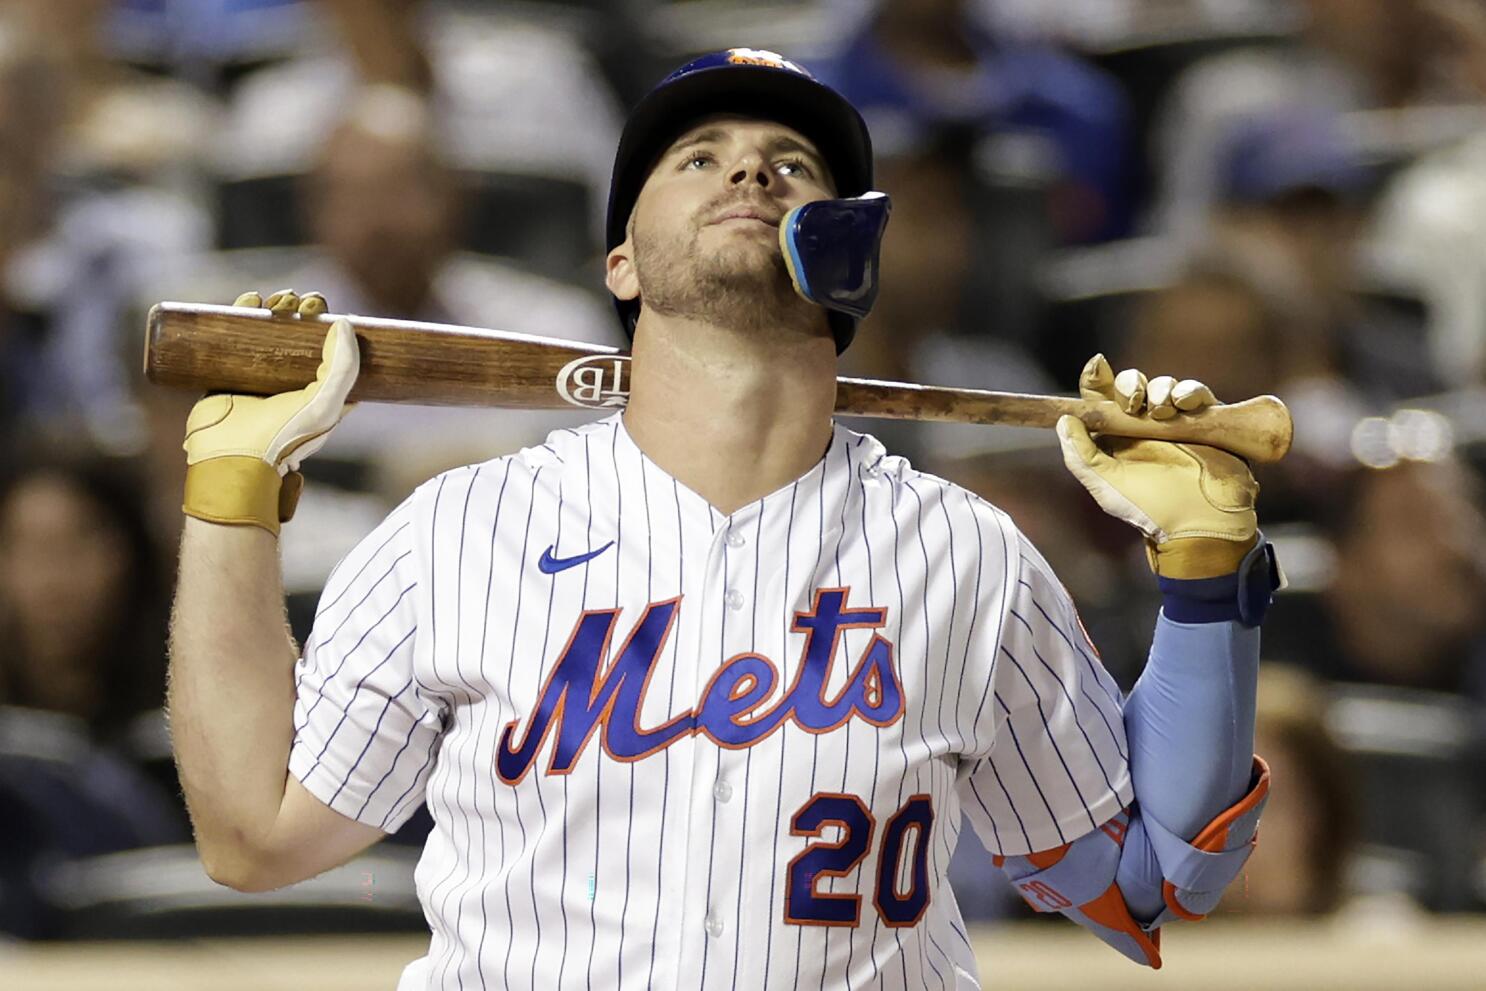 Mets' Pete Alonso says he hit a home run because he desperately